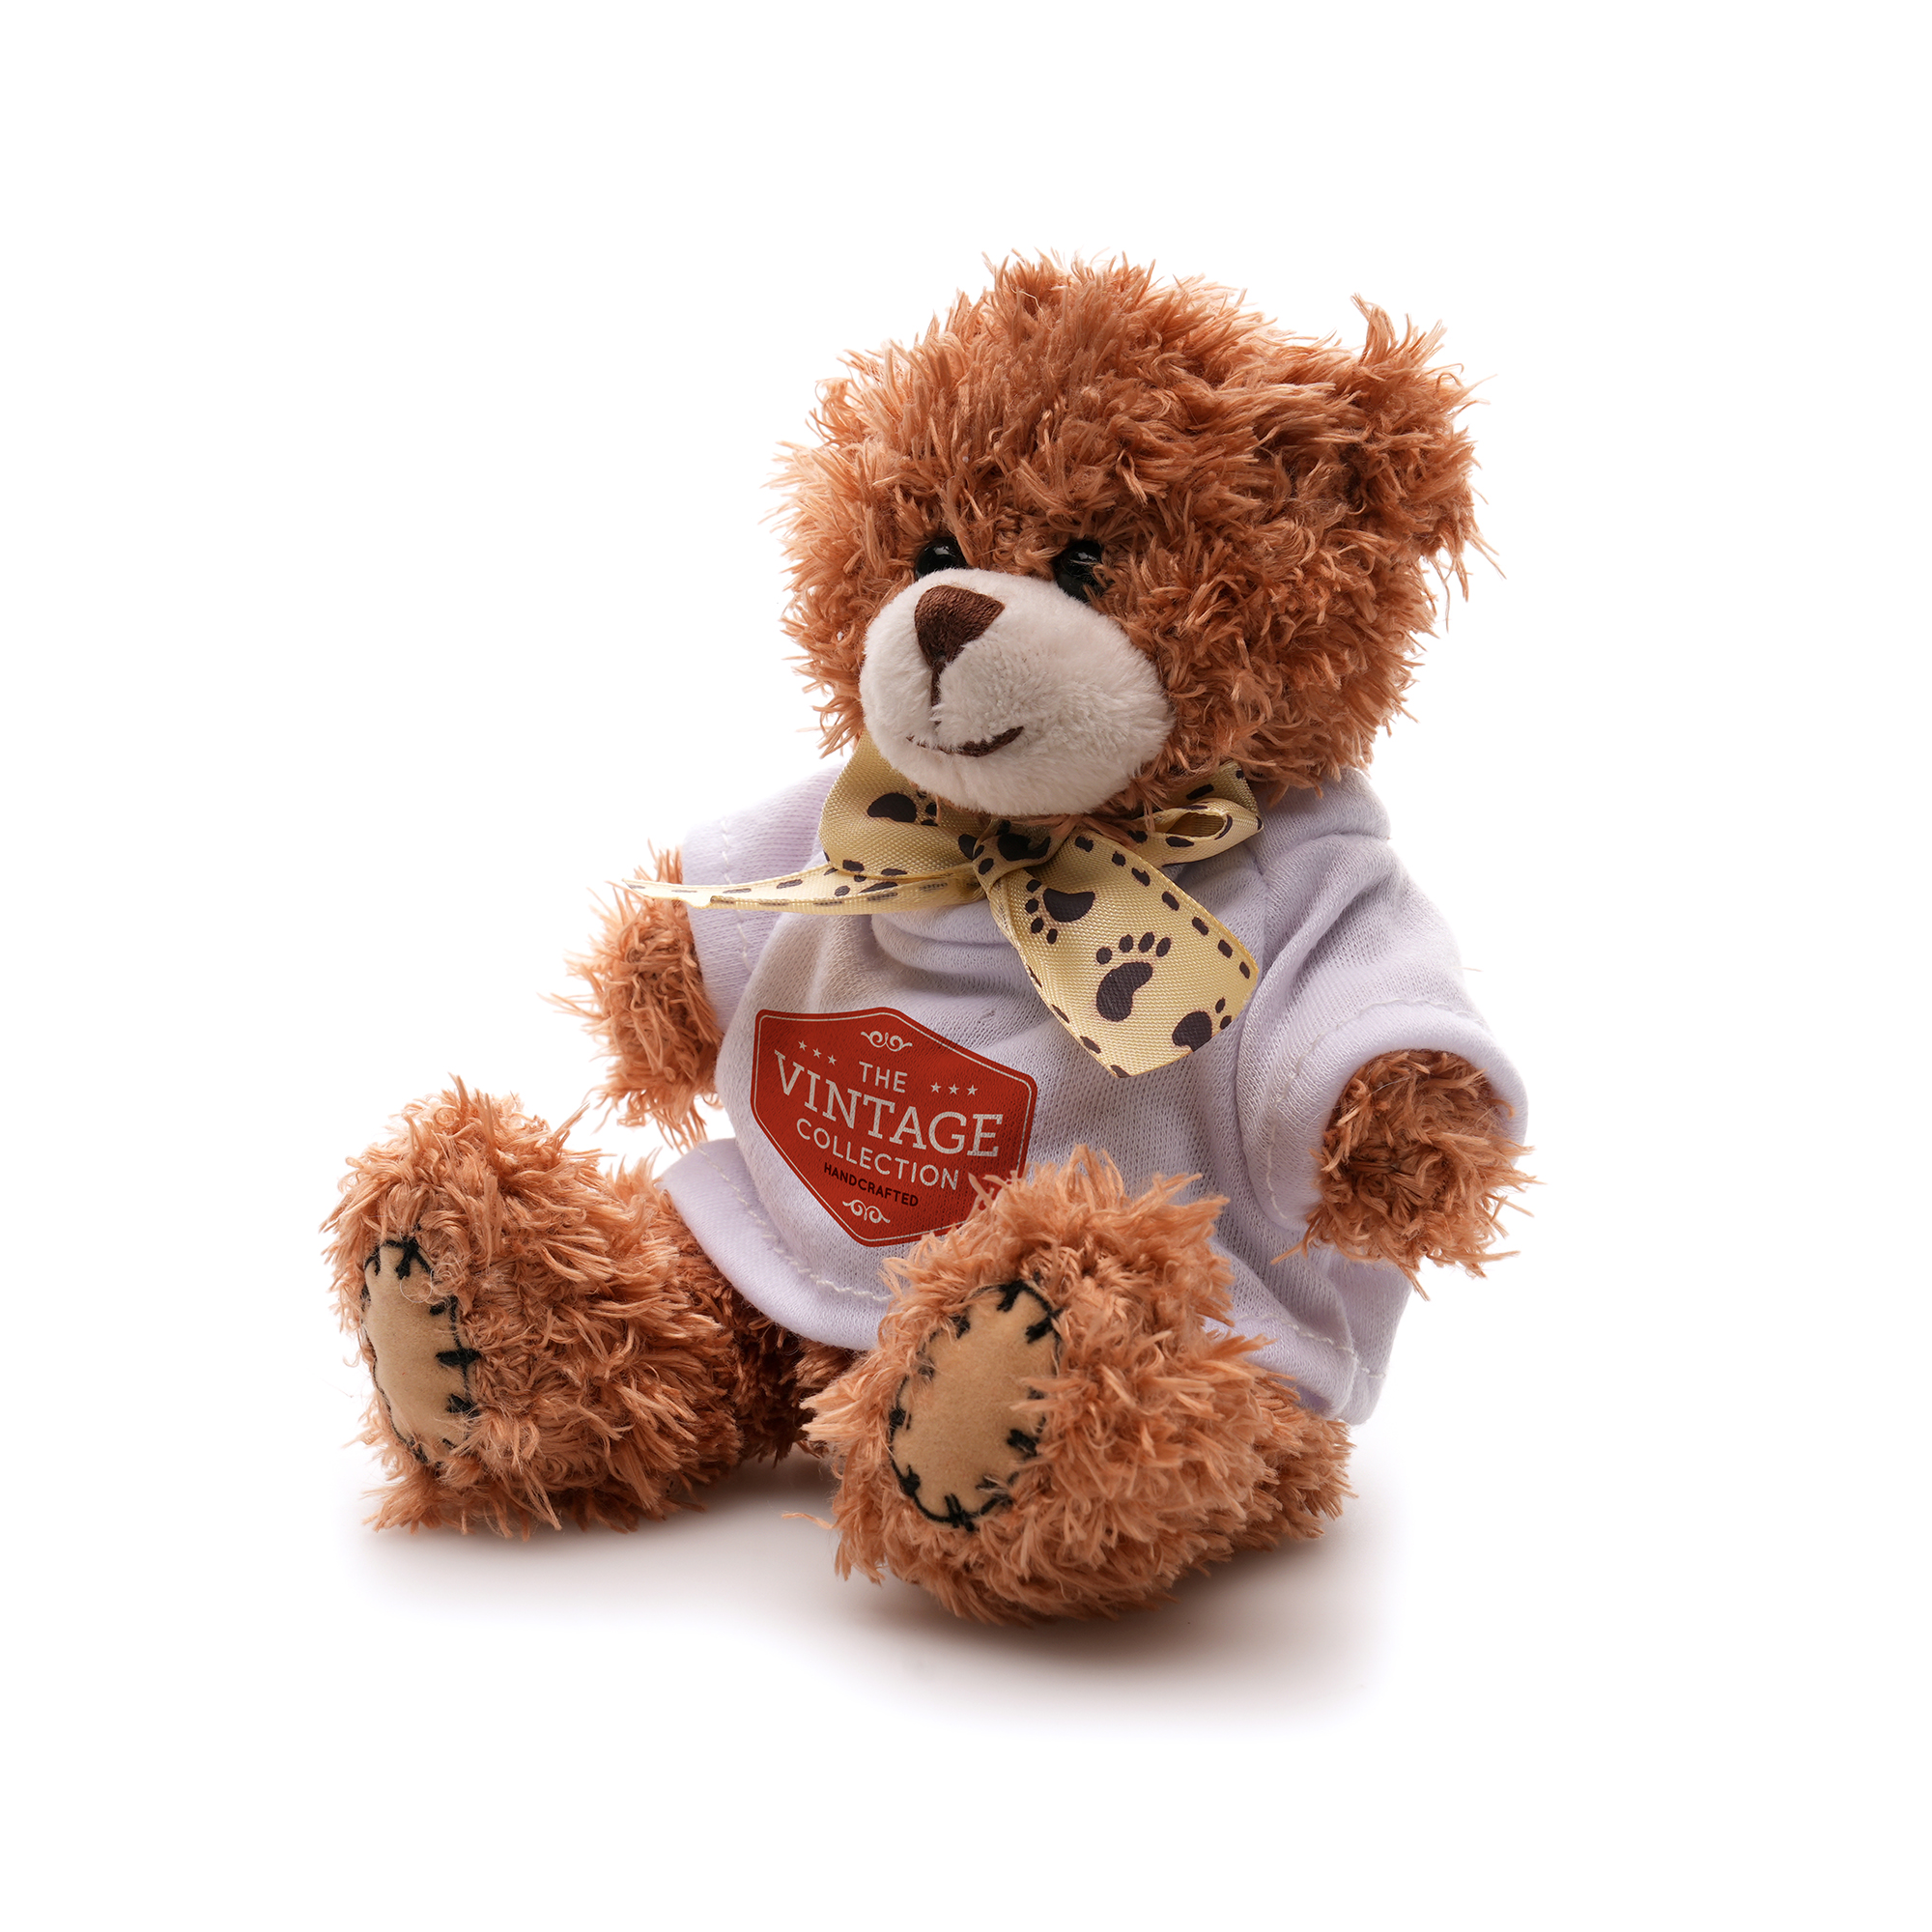 Crafted with polyester fabric and a charming ribbon neck tie for added elegance, this 12cm teddy bear comes with cotton filler, embroidered thread nose and mouth, suede hands, ear pads and plastic eyes adding a delightful tactile element.